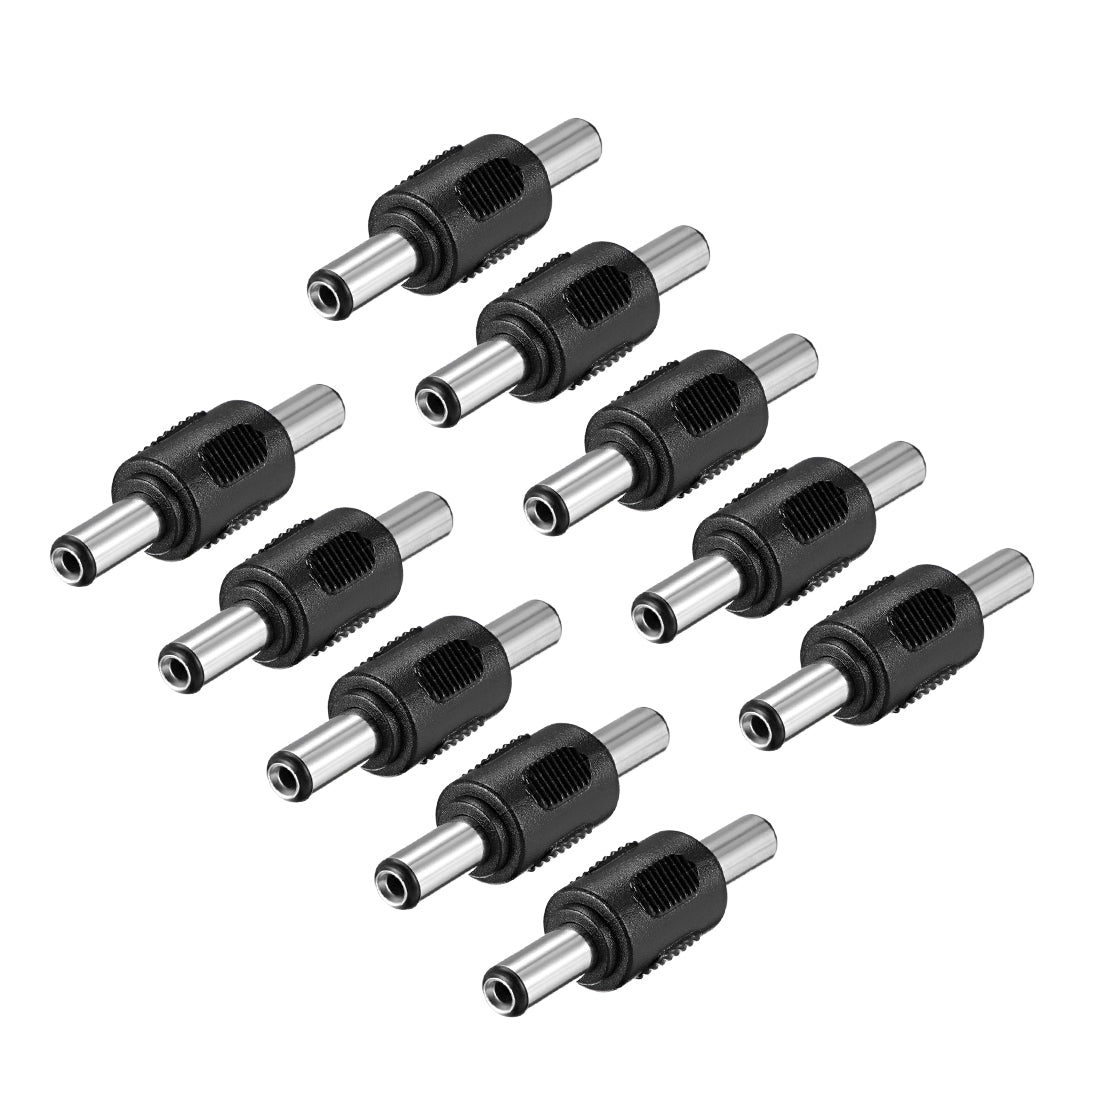 uxcell Uxcell 10Pcs DC Male to Male Connector 5.5mm x 2.5mm Power Cable Jack Adapter Black